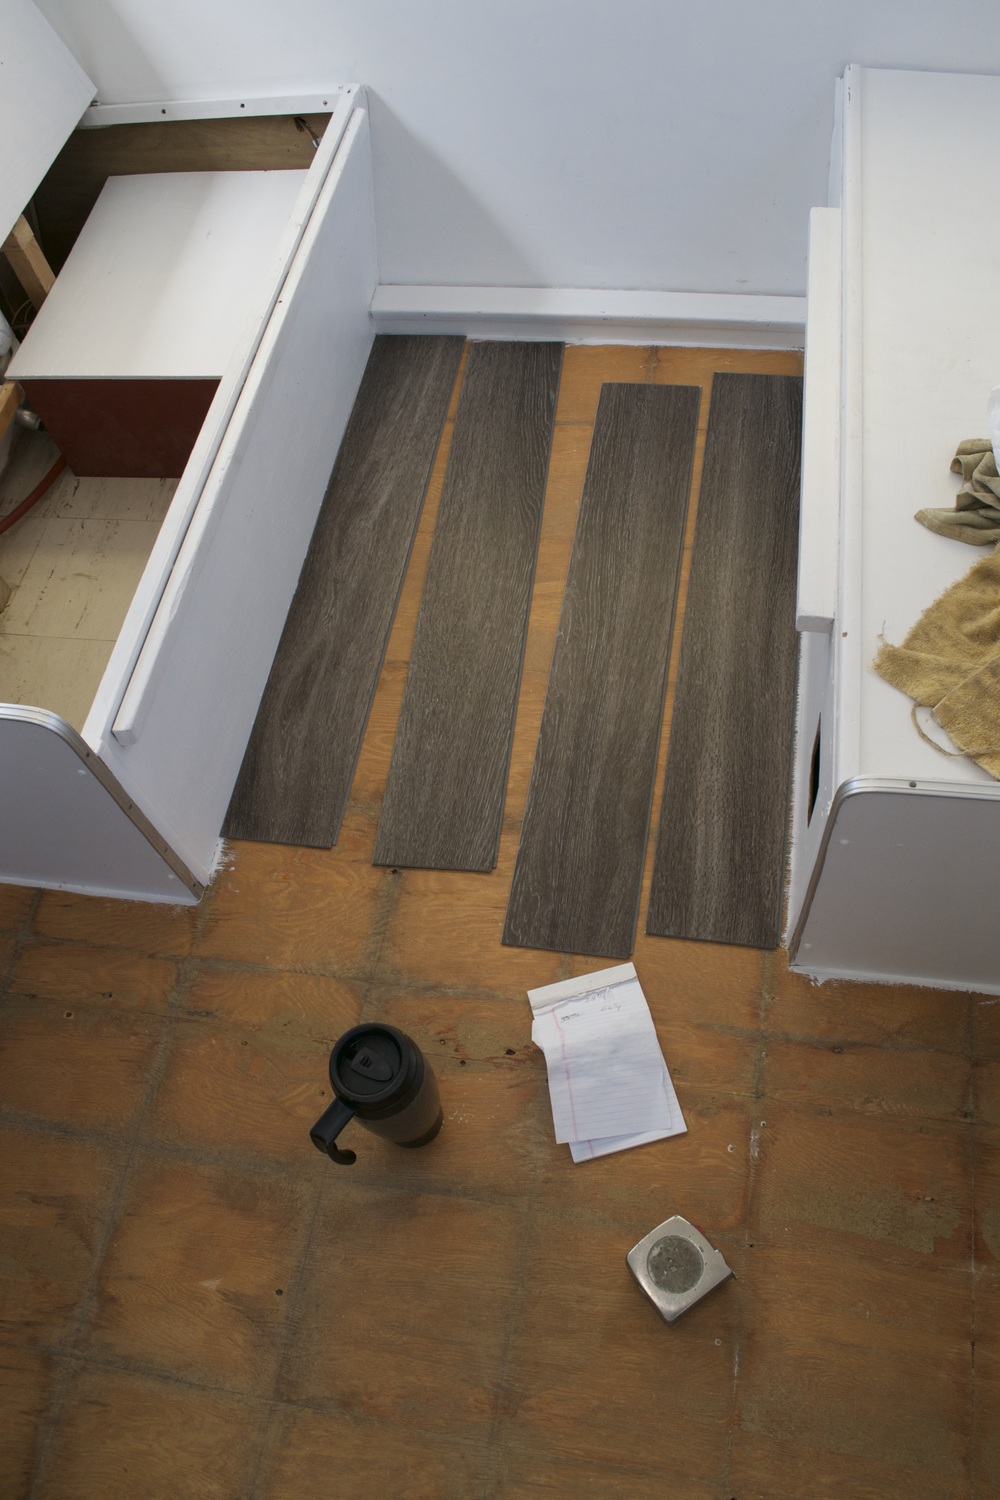 How do you find the right vinyl plank flooring?